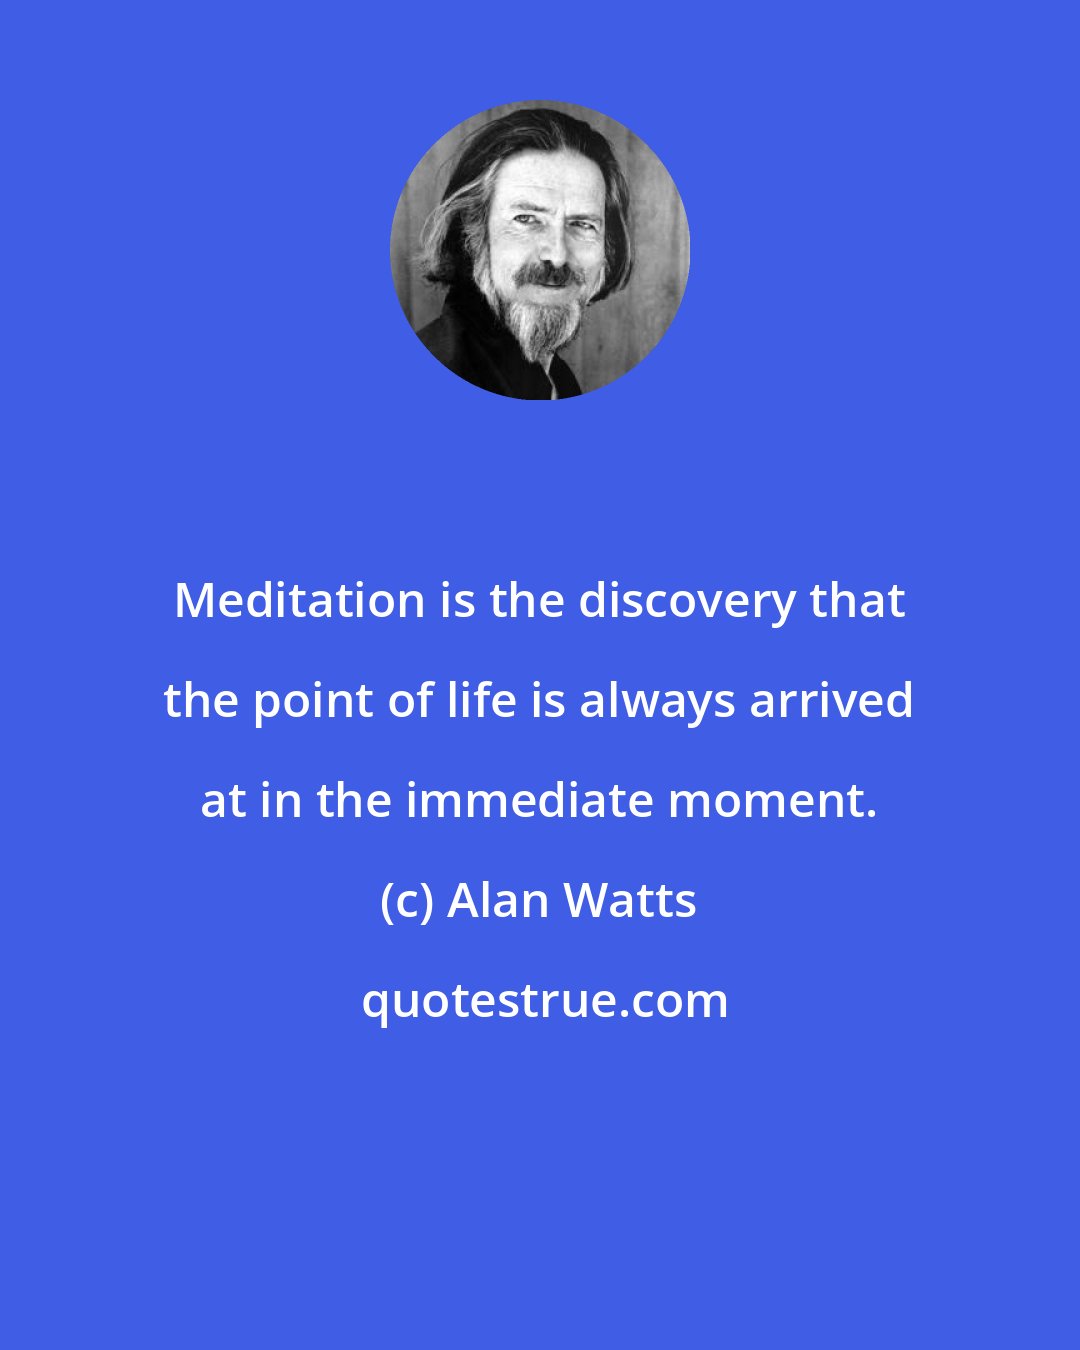 Alan Watts: Meditation is the discovery that the point of life is always arrived at in the immediate moment.